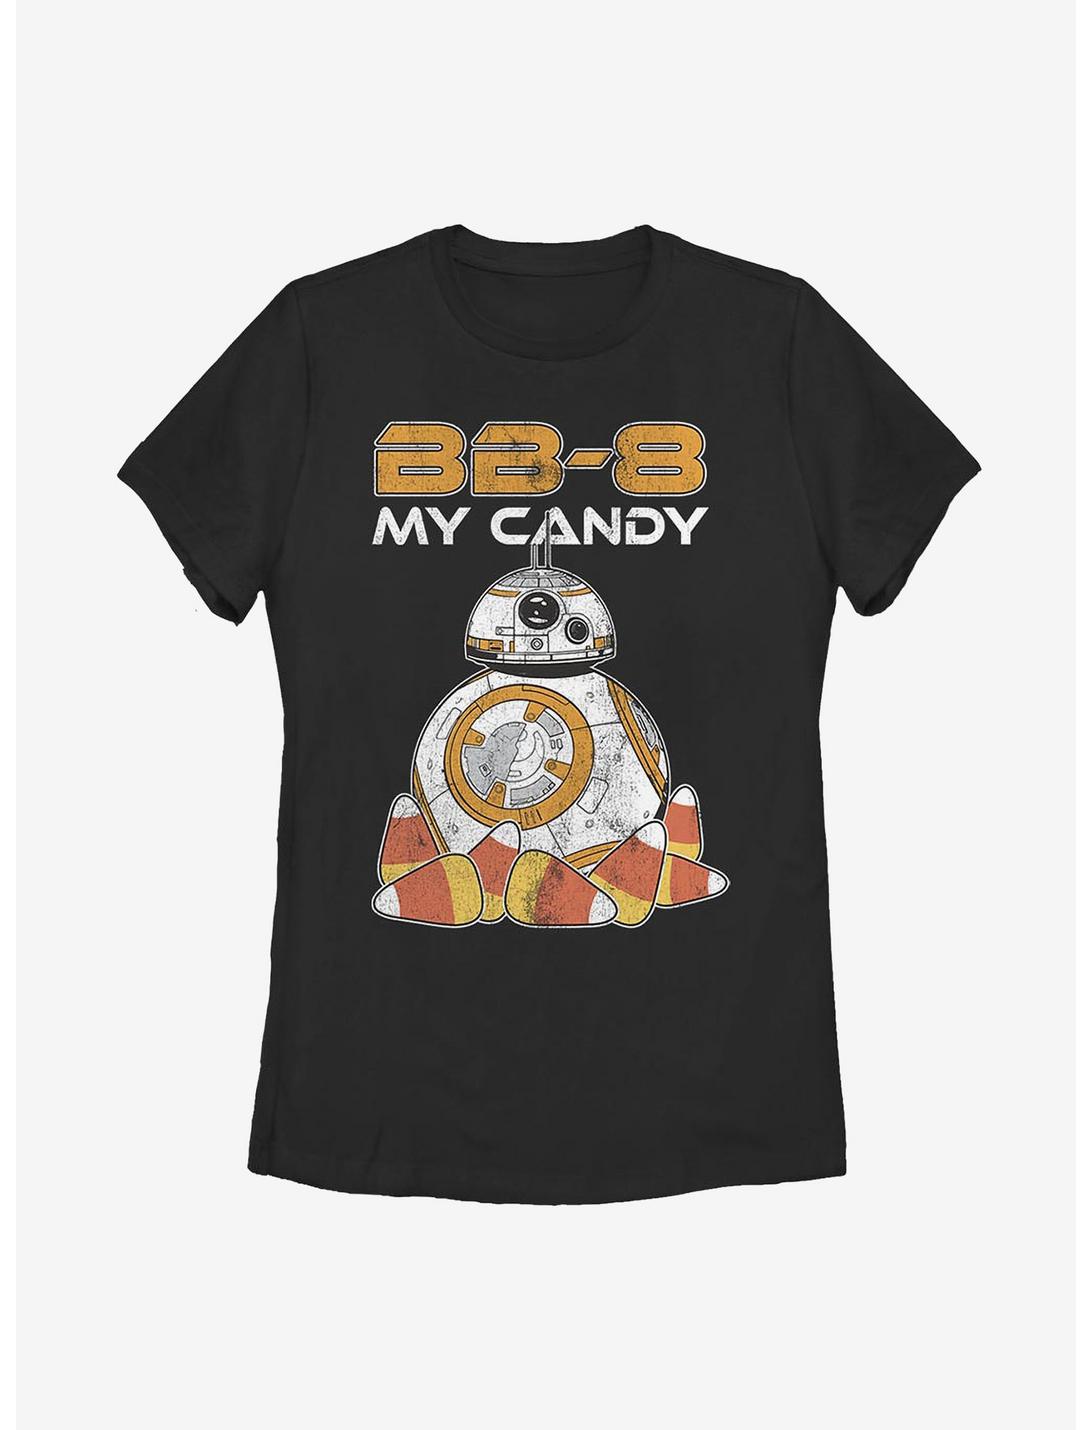 Star Wars Episode VII: The Force Awakens BB-8 Candy Womens T-Shirt, BLACK, hi-res